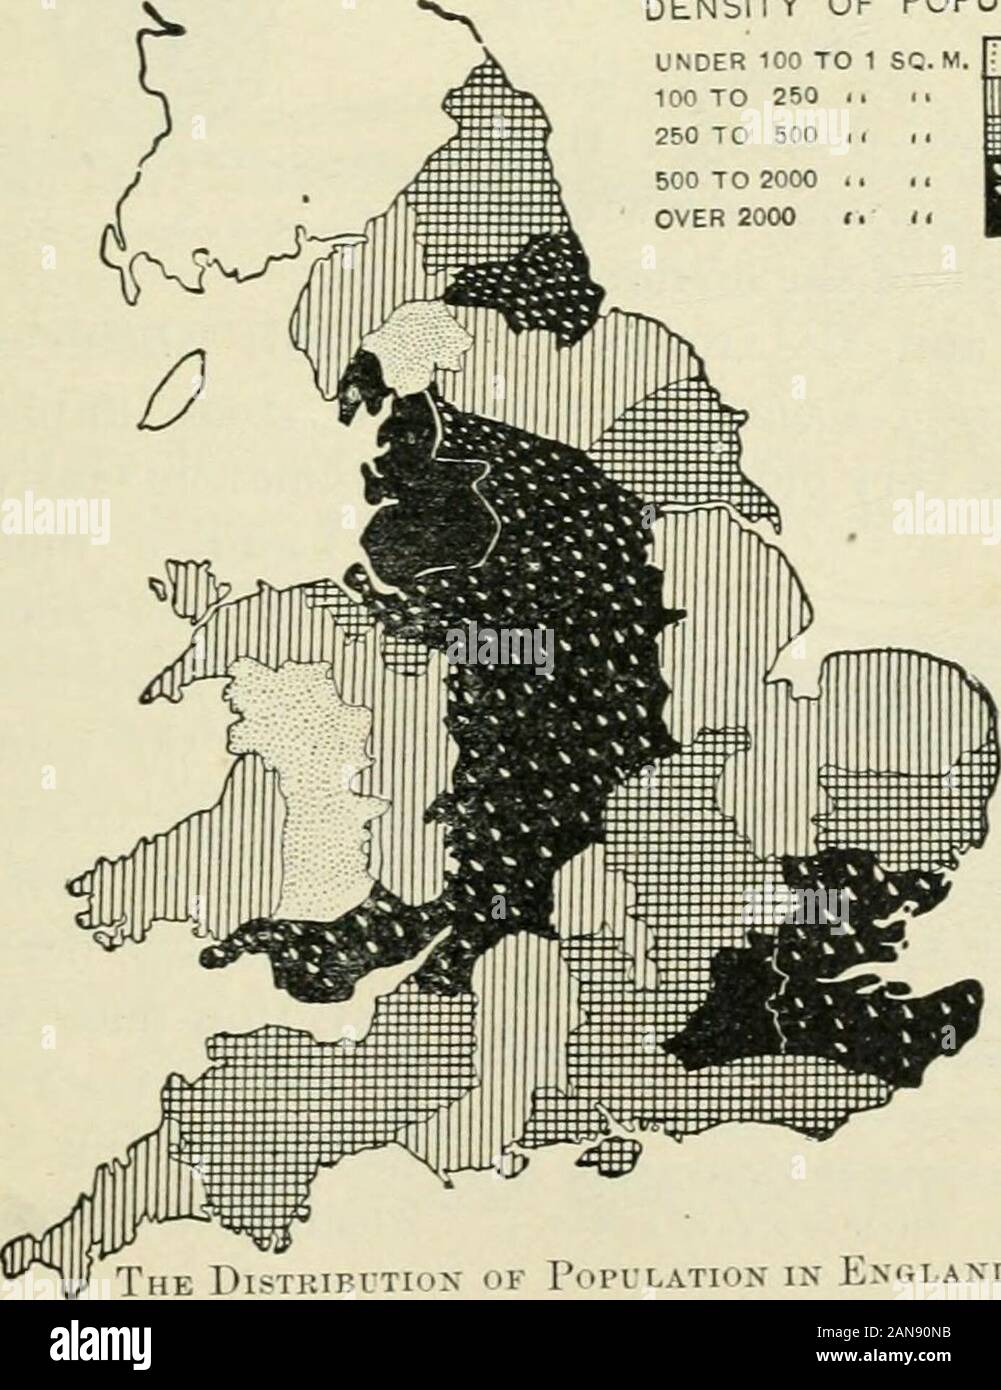 The British nation a history / by George MWrong . 1901 DENSITY OF POPULATION UNDER 100 TO 1 SQ100 TO 250 i&gt;250 TO 500 I .500 TO 2000 ..OVER 2000 11. sLTiox OK Population in Exglaxd befoke AND AFTER THE DEVELOPMENT OF MaNCFACTUKING INDUSTRY. THE BlilTISU NATION hunters, similar iu type to the Eskimos of Greenland,The game of their time included the reindeer and themoose-ox, the ele-phant, the mam-moth, and the lion.These x&gt;eople livedand at first had wit Questions ofrace: &lt;li ThePalseolithio[^ culture. ^y m caves, S to use only such implements as the clubs and stones which Stock Photo